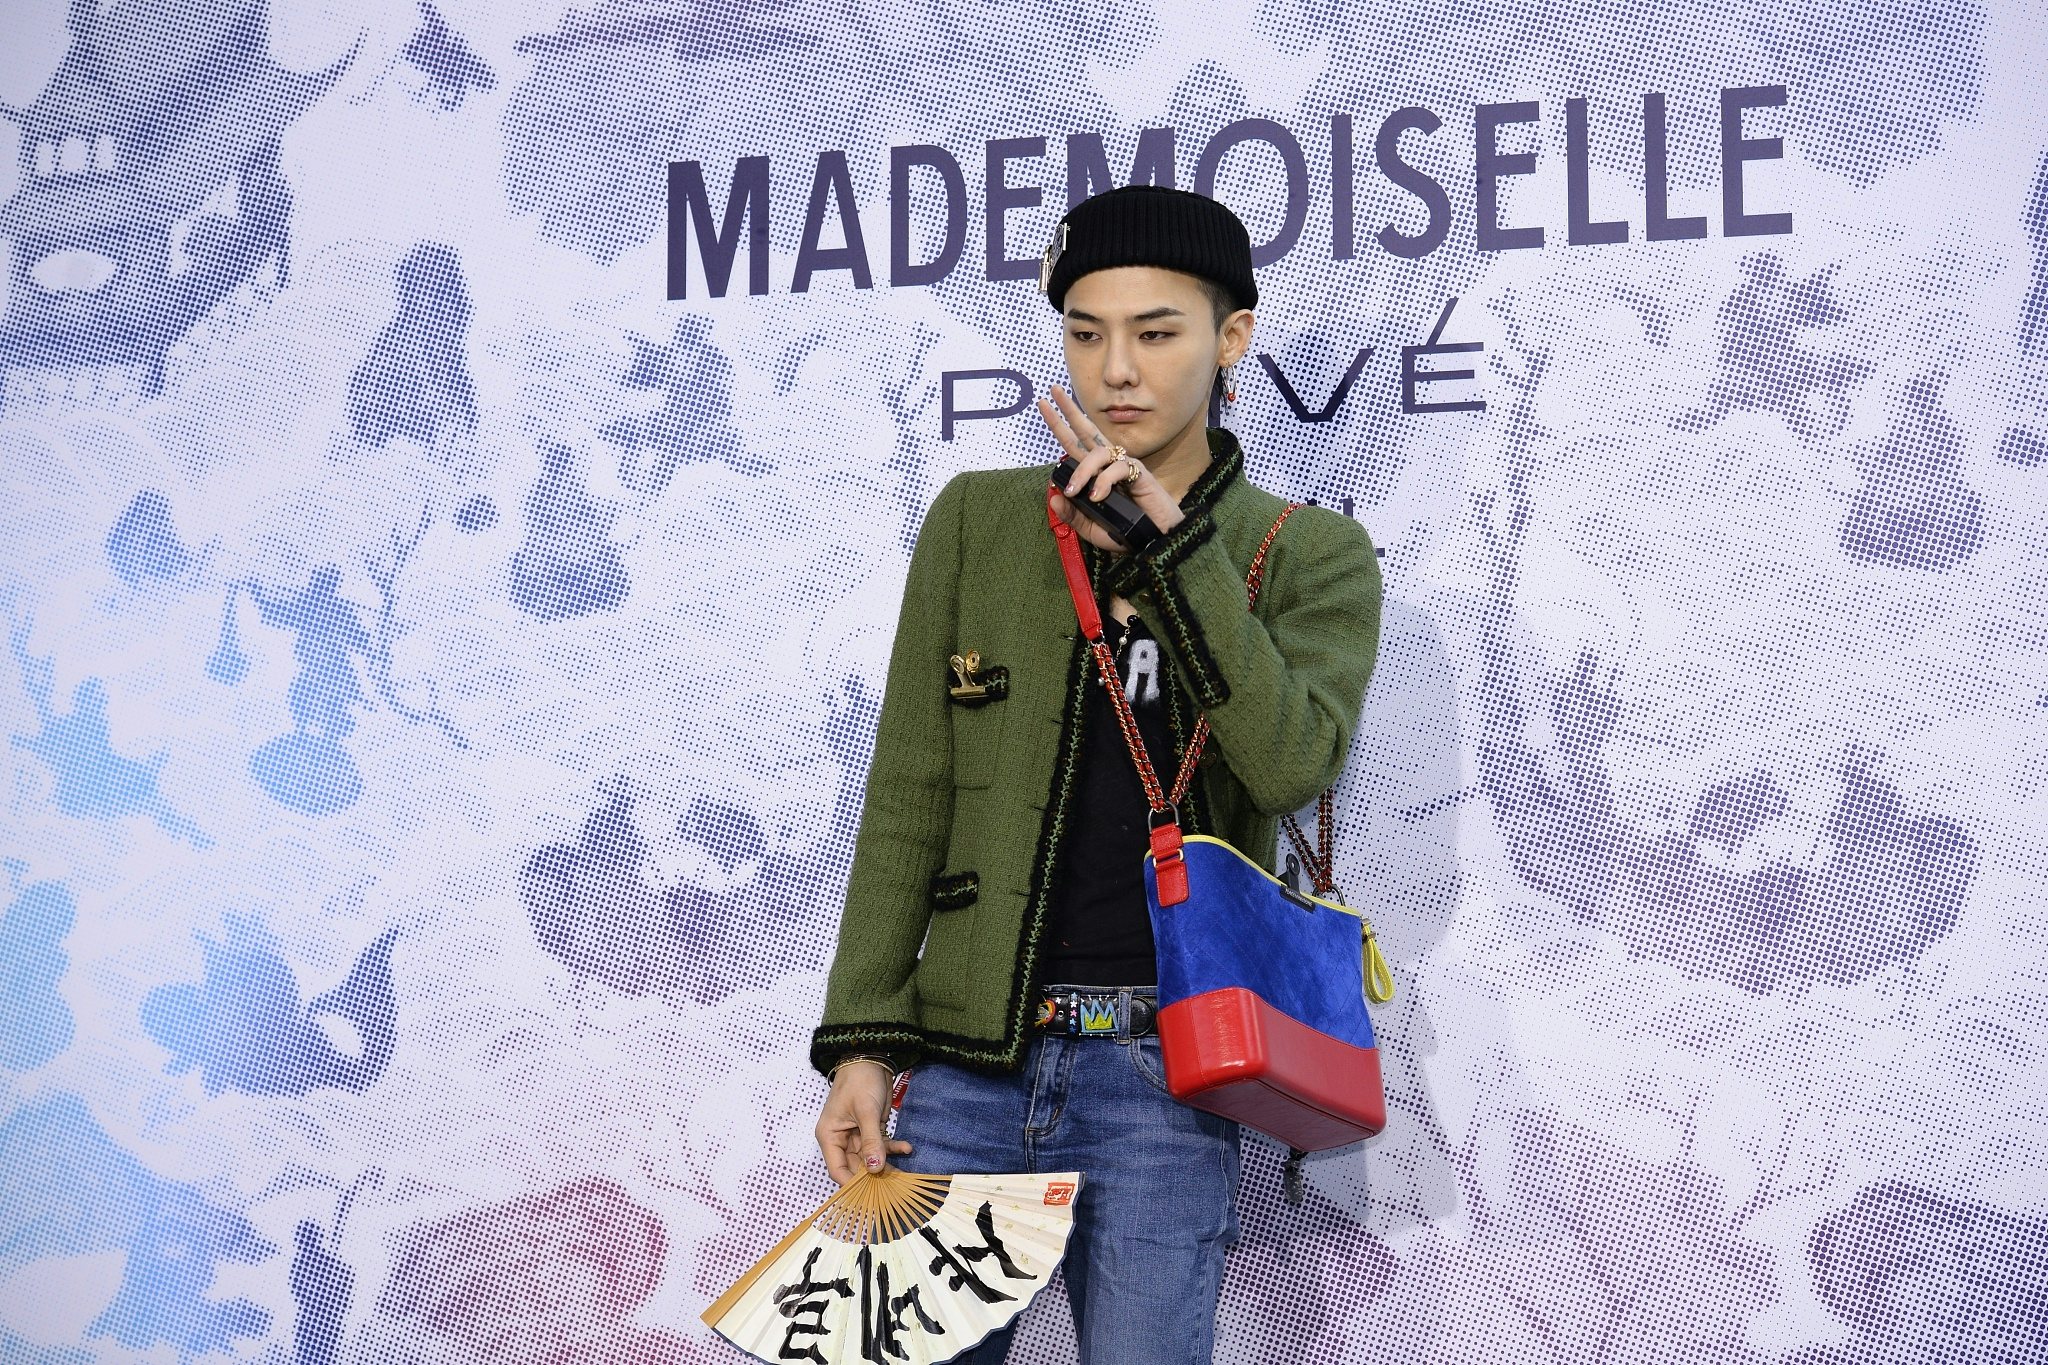 At most Chanel events, the brand’s Asia ambassador, G-dragon is a front row fixture for good reason. Last year, the K-pop star was ranked third most influential star in China by Sina Entertainment, according to his Weibo search analytics and other factors. Photo: VCG